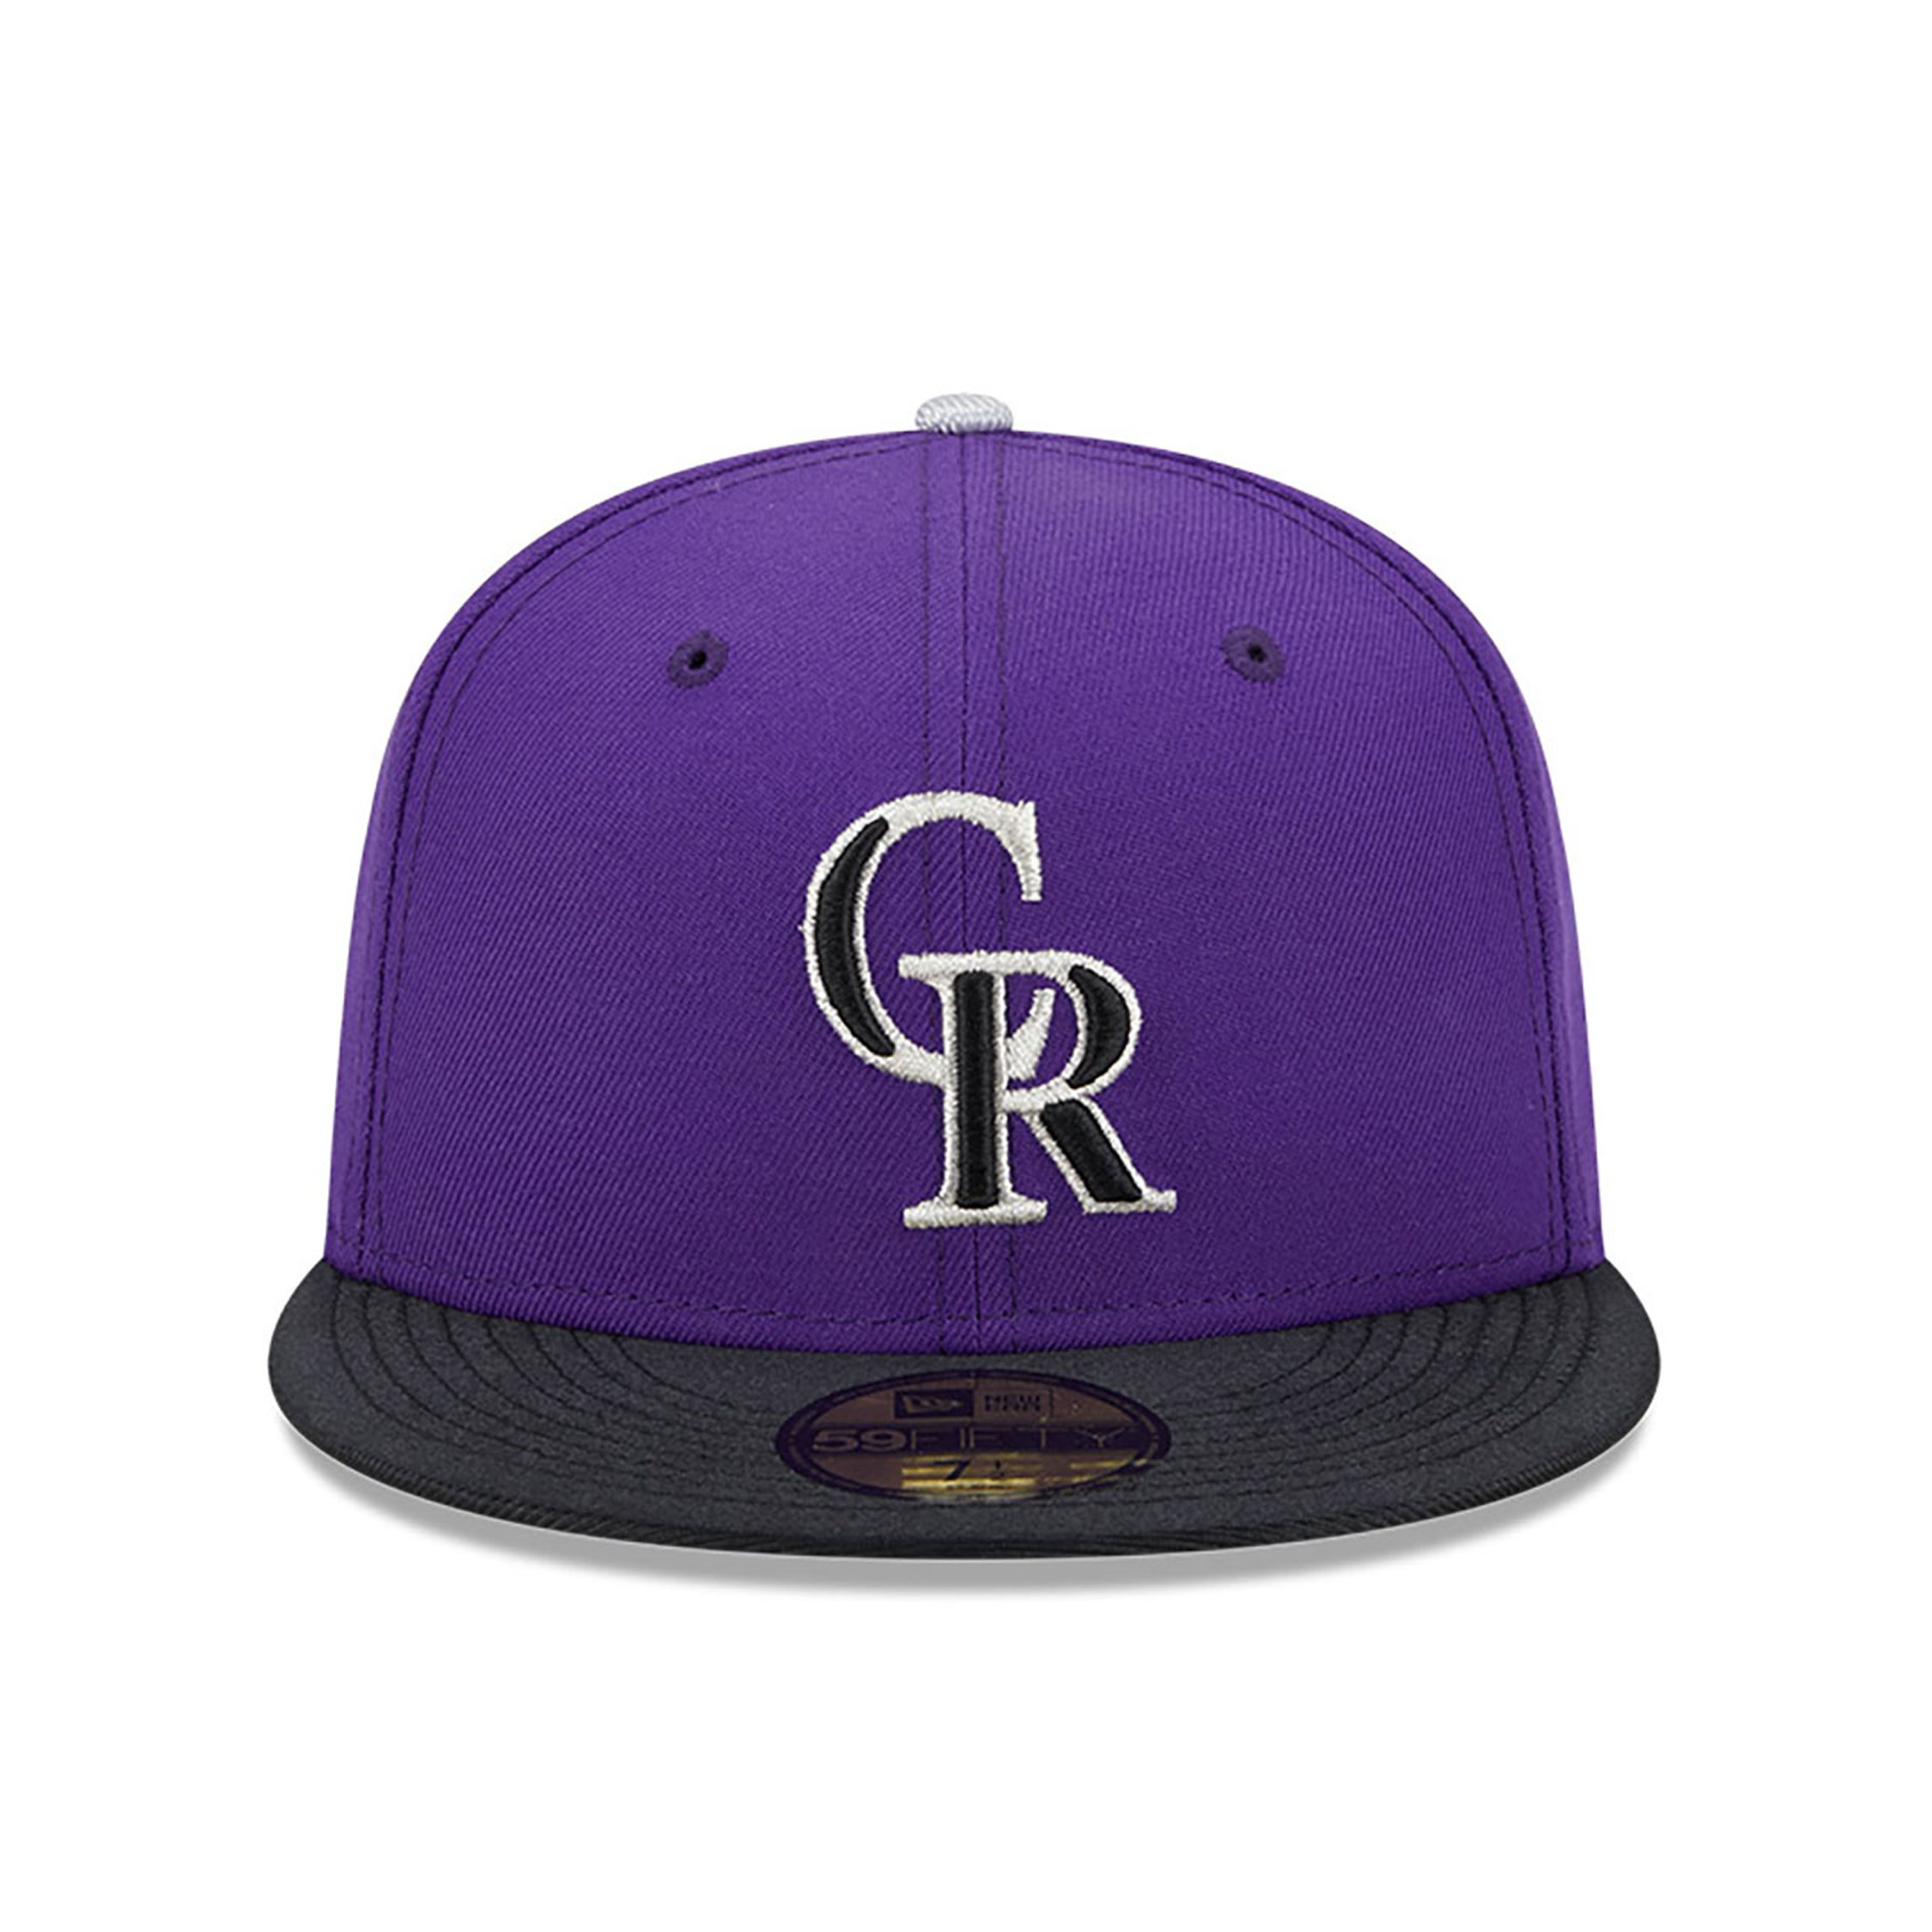 Colorado Rockies Team Shimmer Purple 59FIFTY Fitted Cap